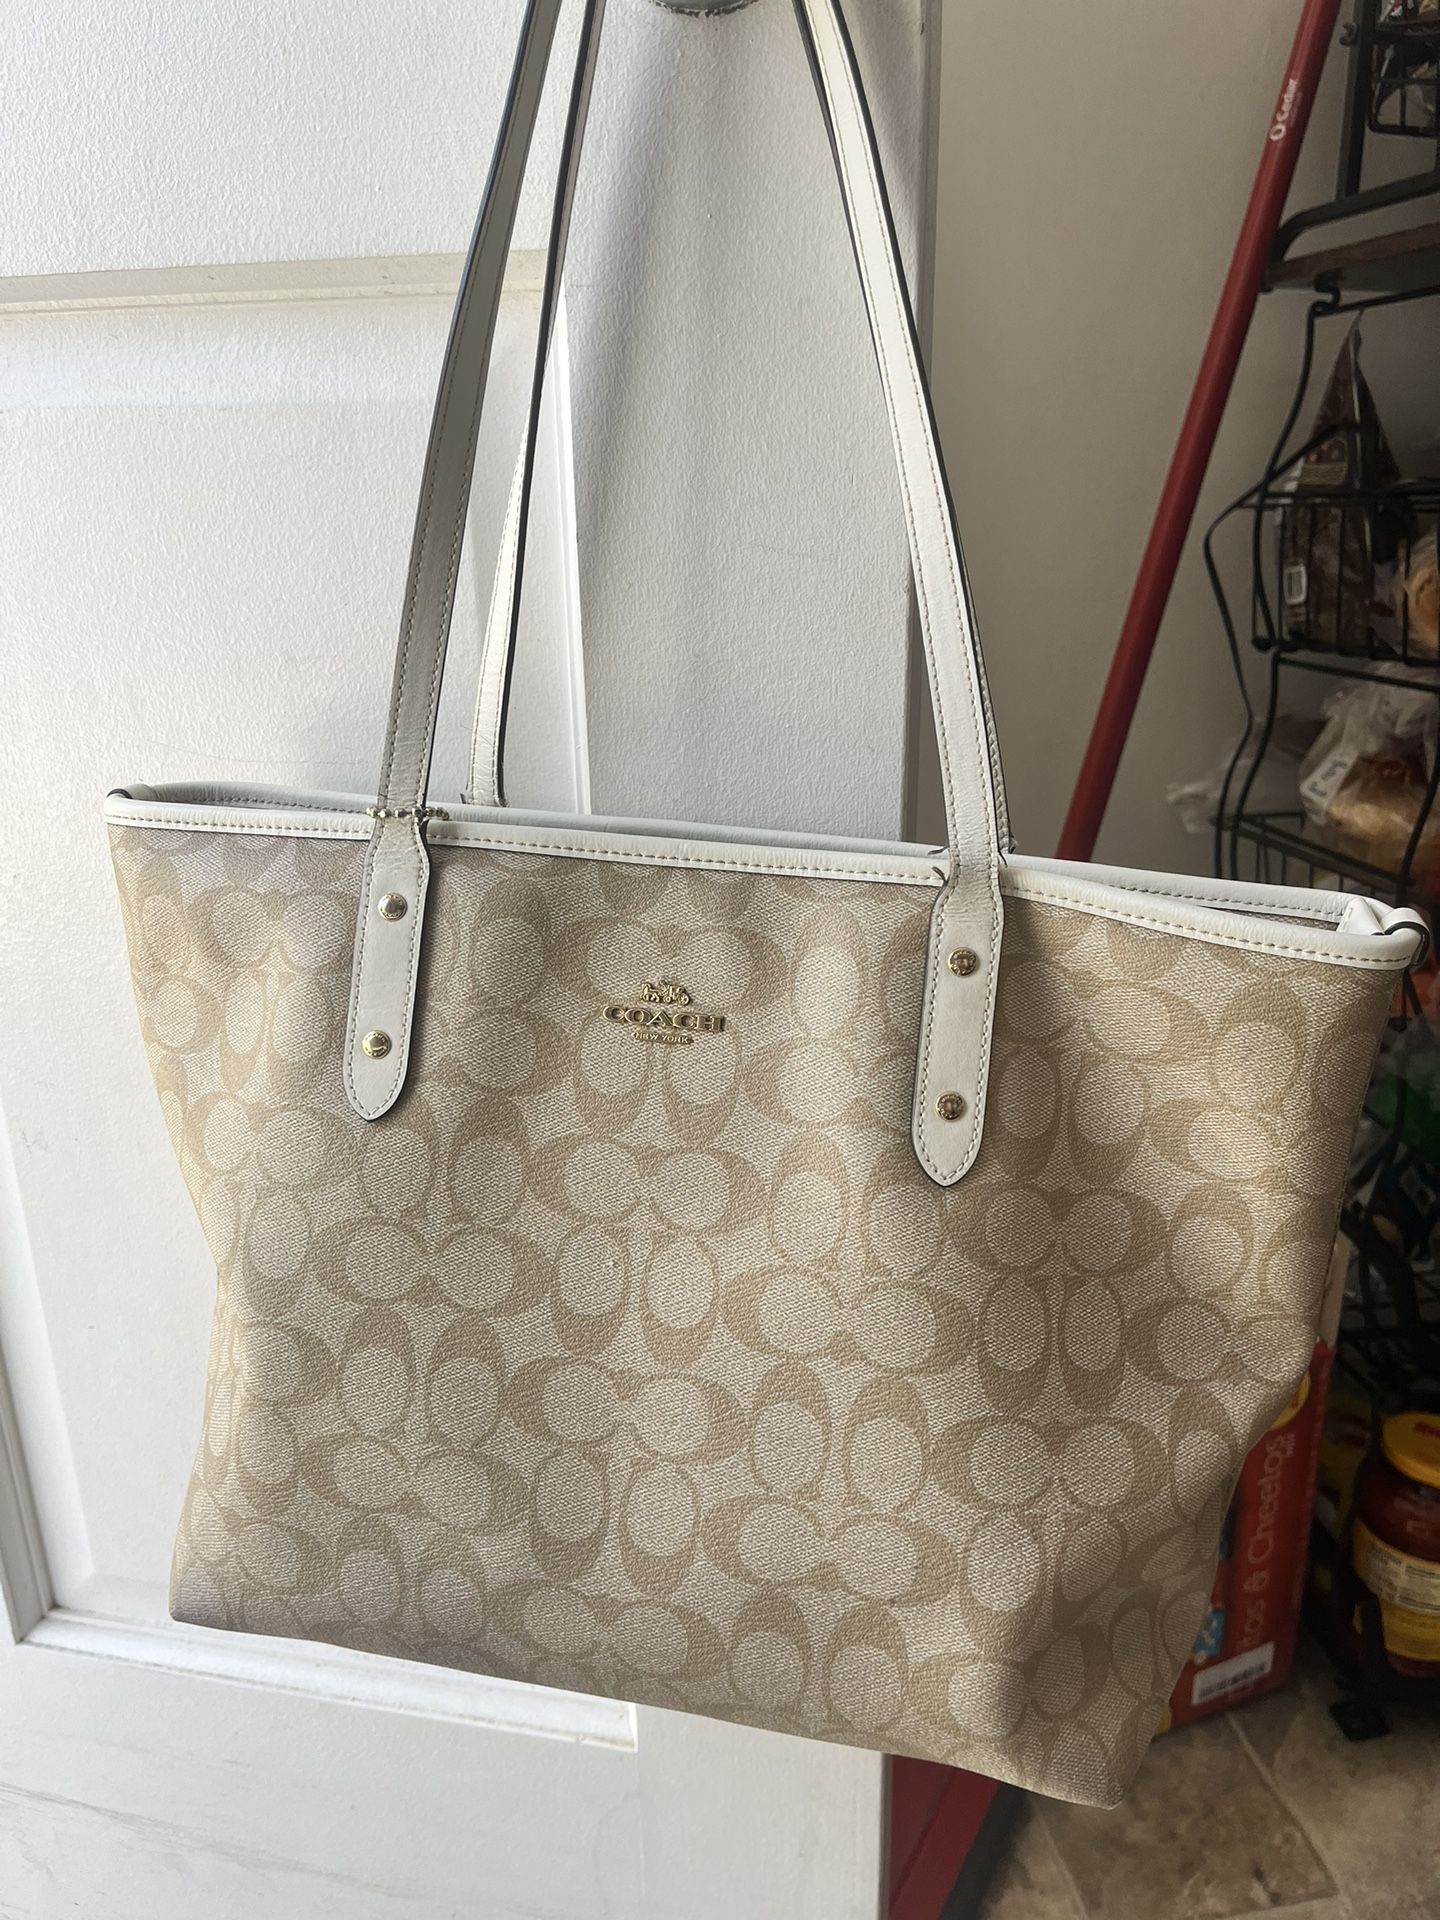 Large Coach Tote 